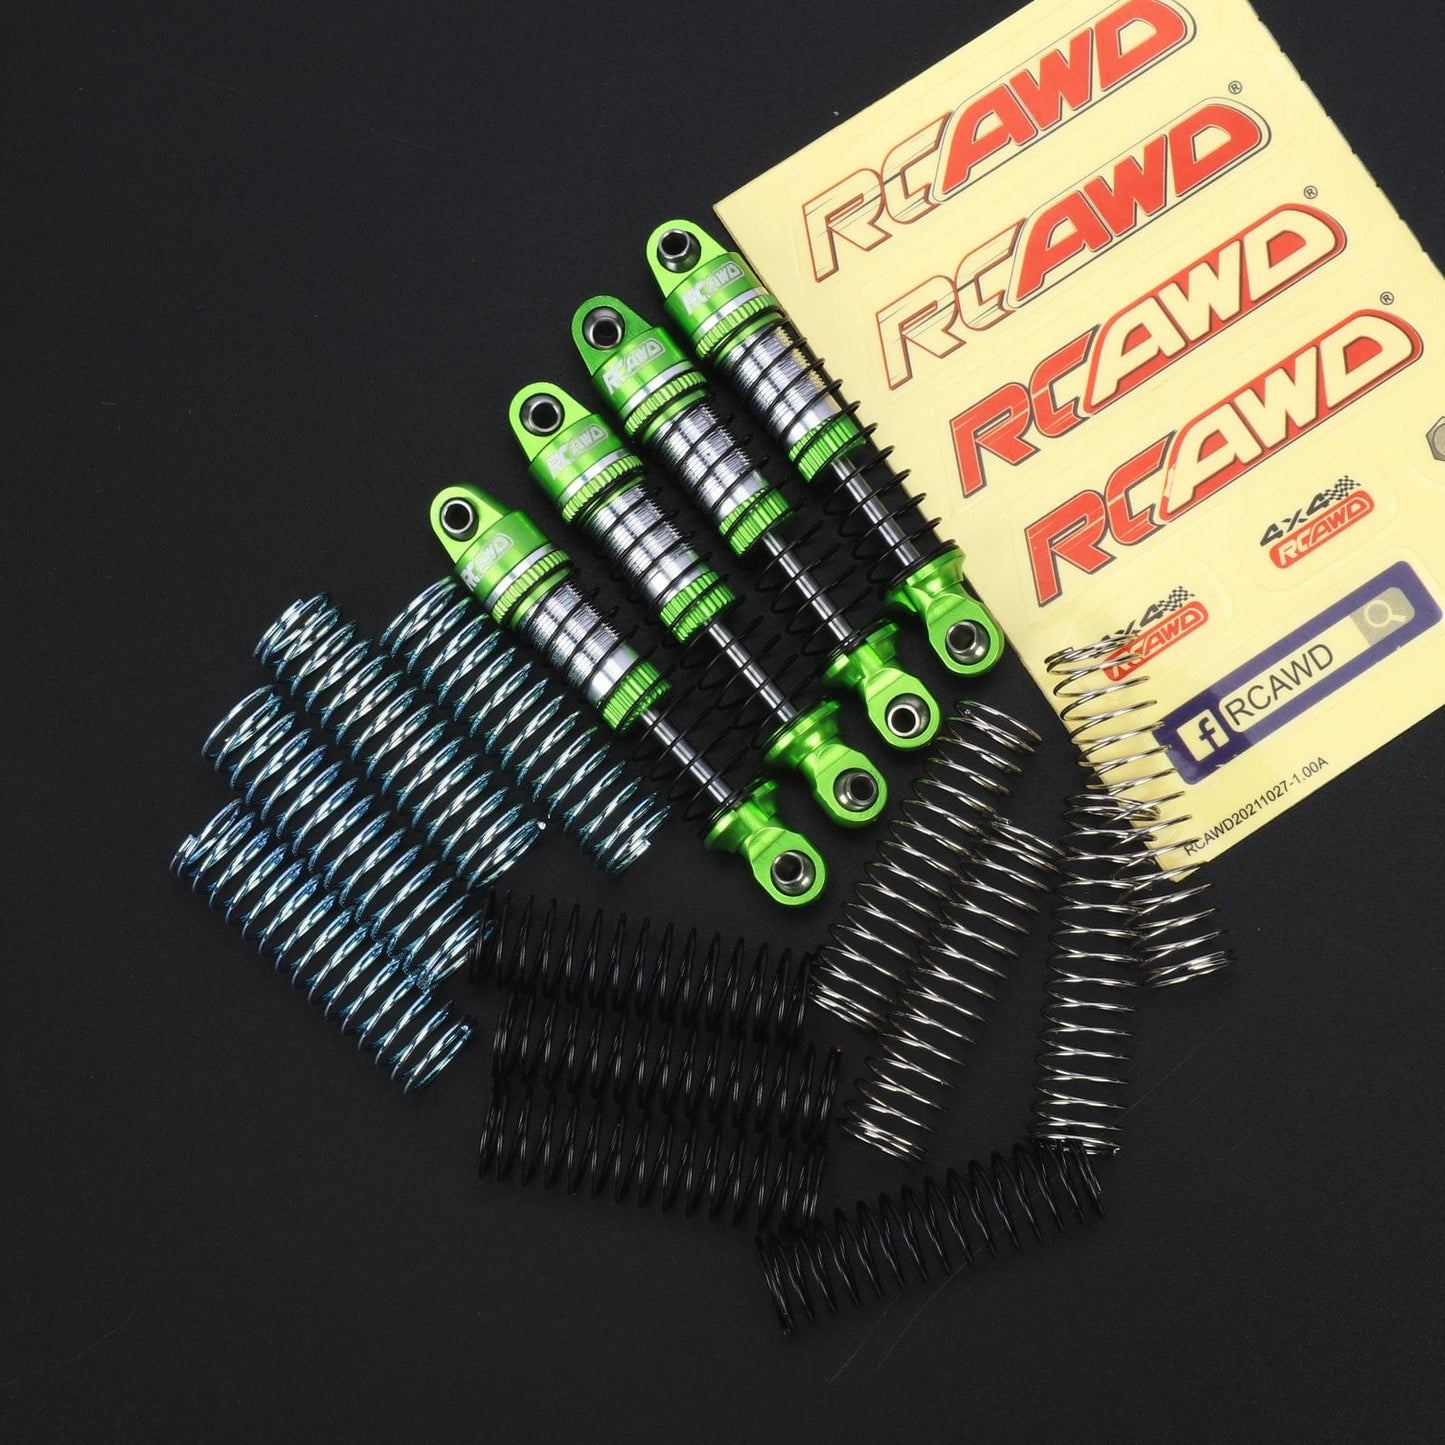 RCAWD 50mm Oil - fill Type Shock Absorber for Trx4m Upgrades with 3sets replacement springs - RCAWD